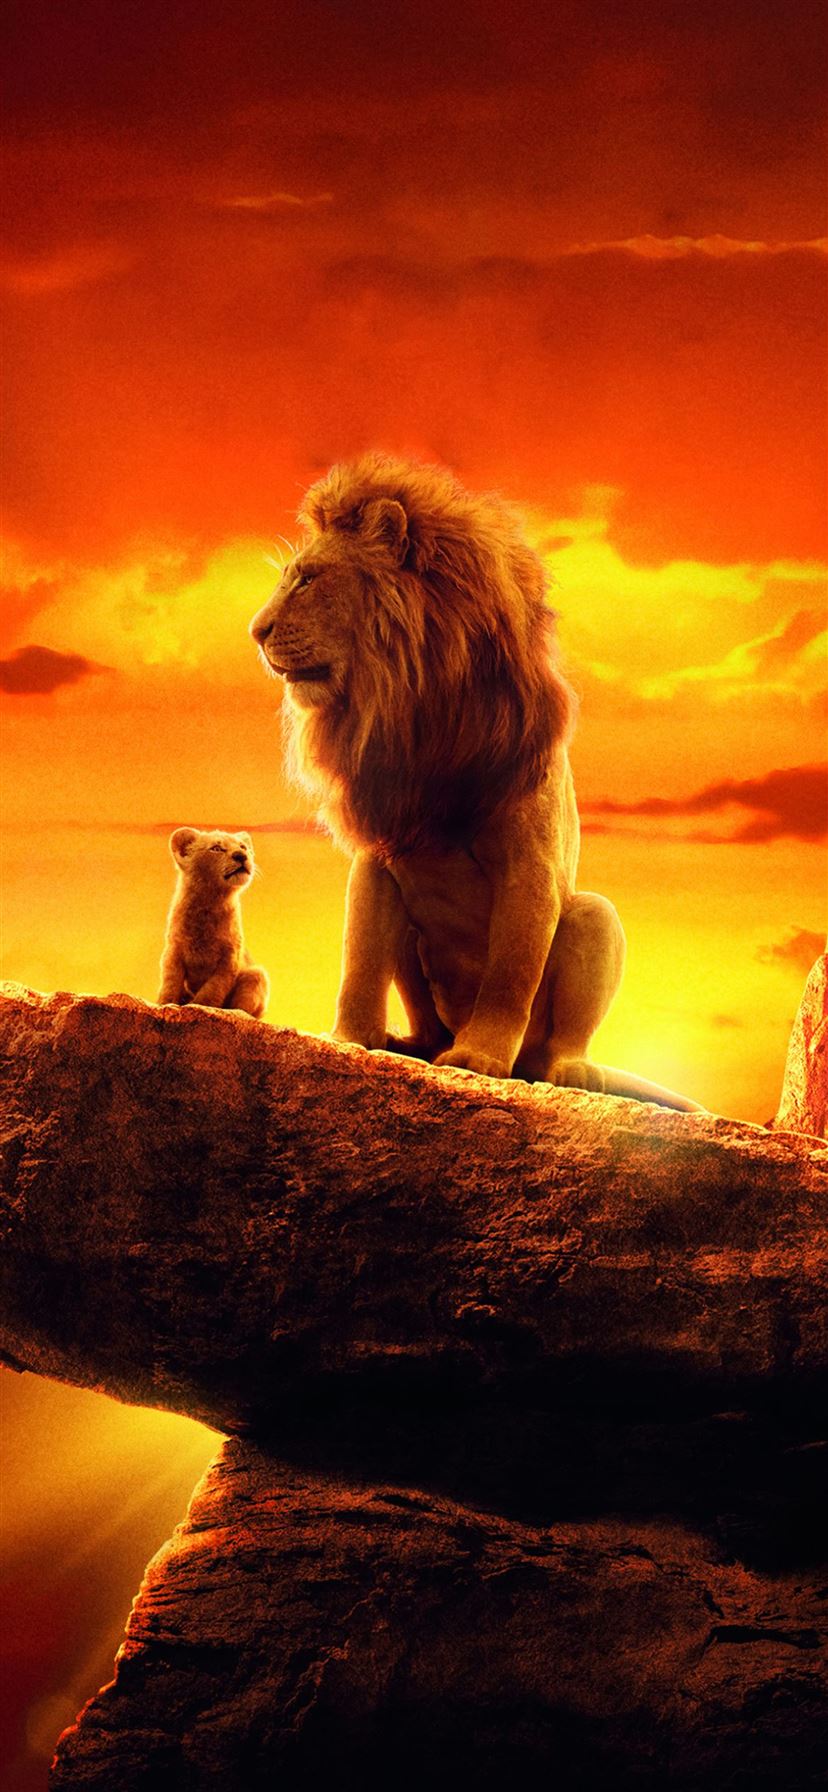 The Lion King 19 4k Movie Iphone 11 Wallpapers Free Download